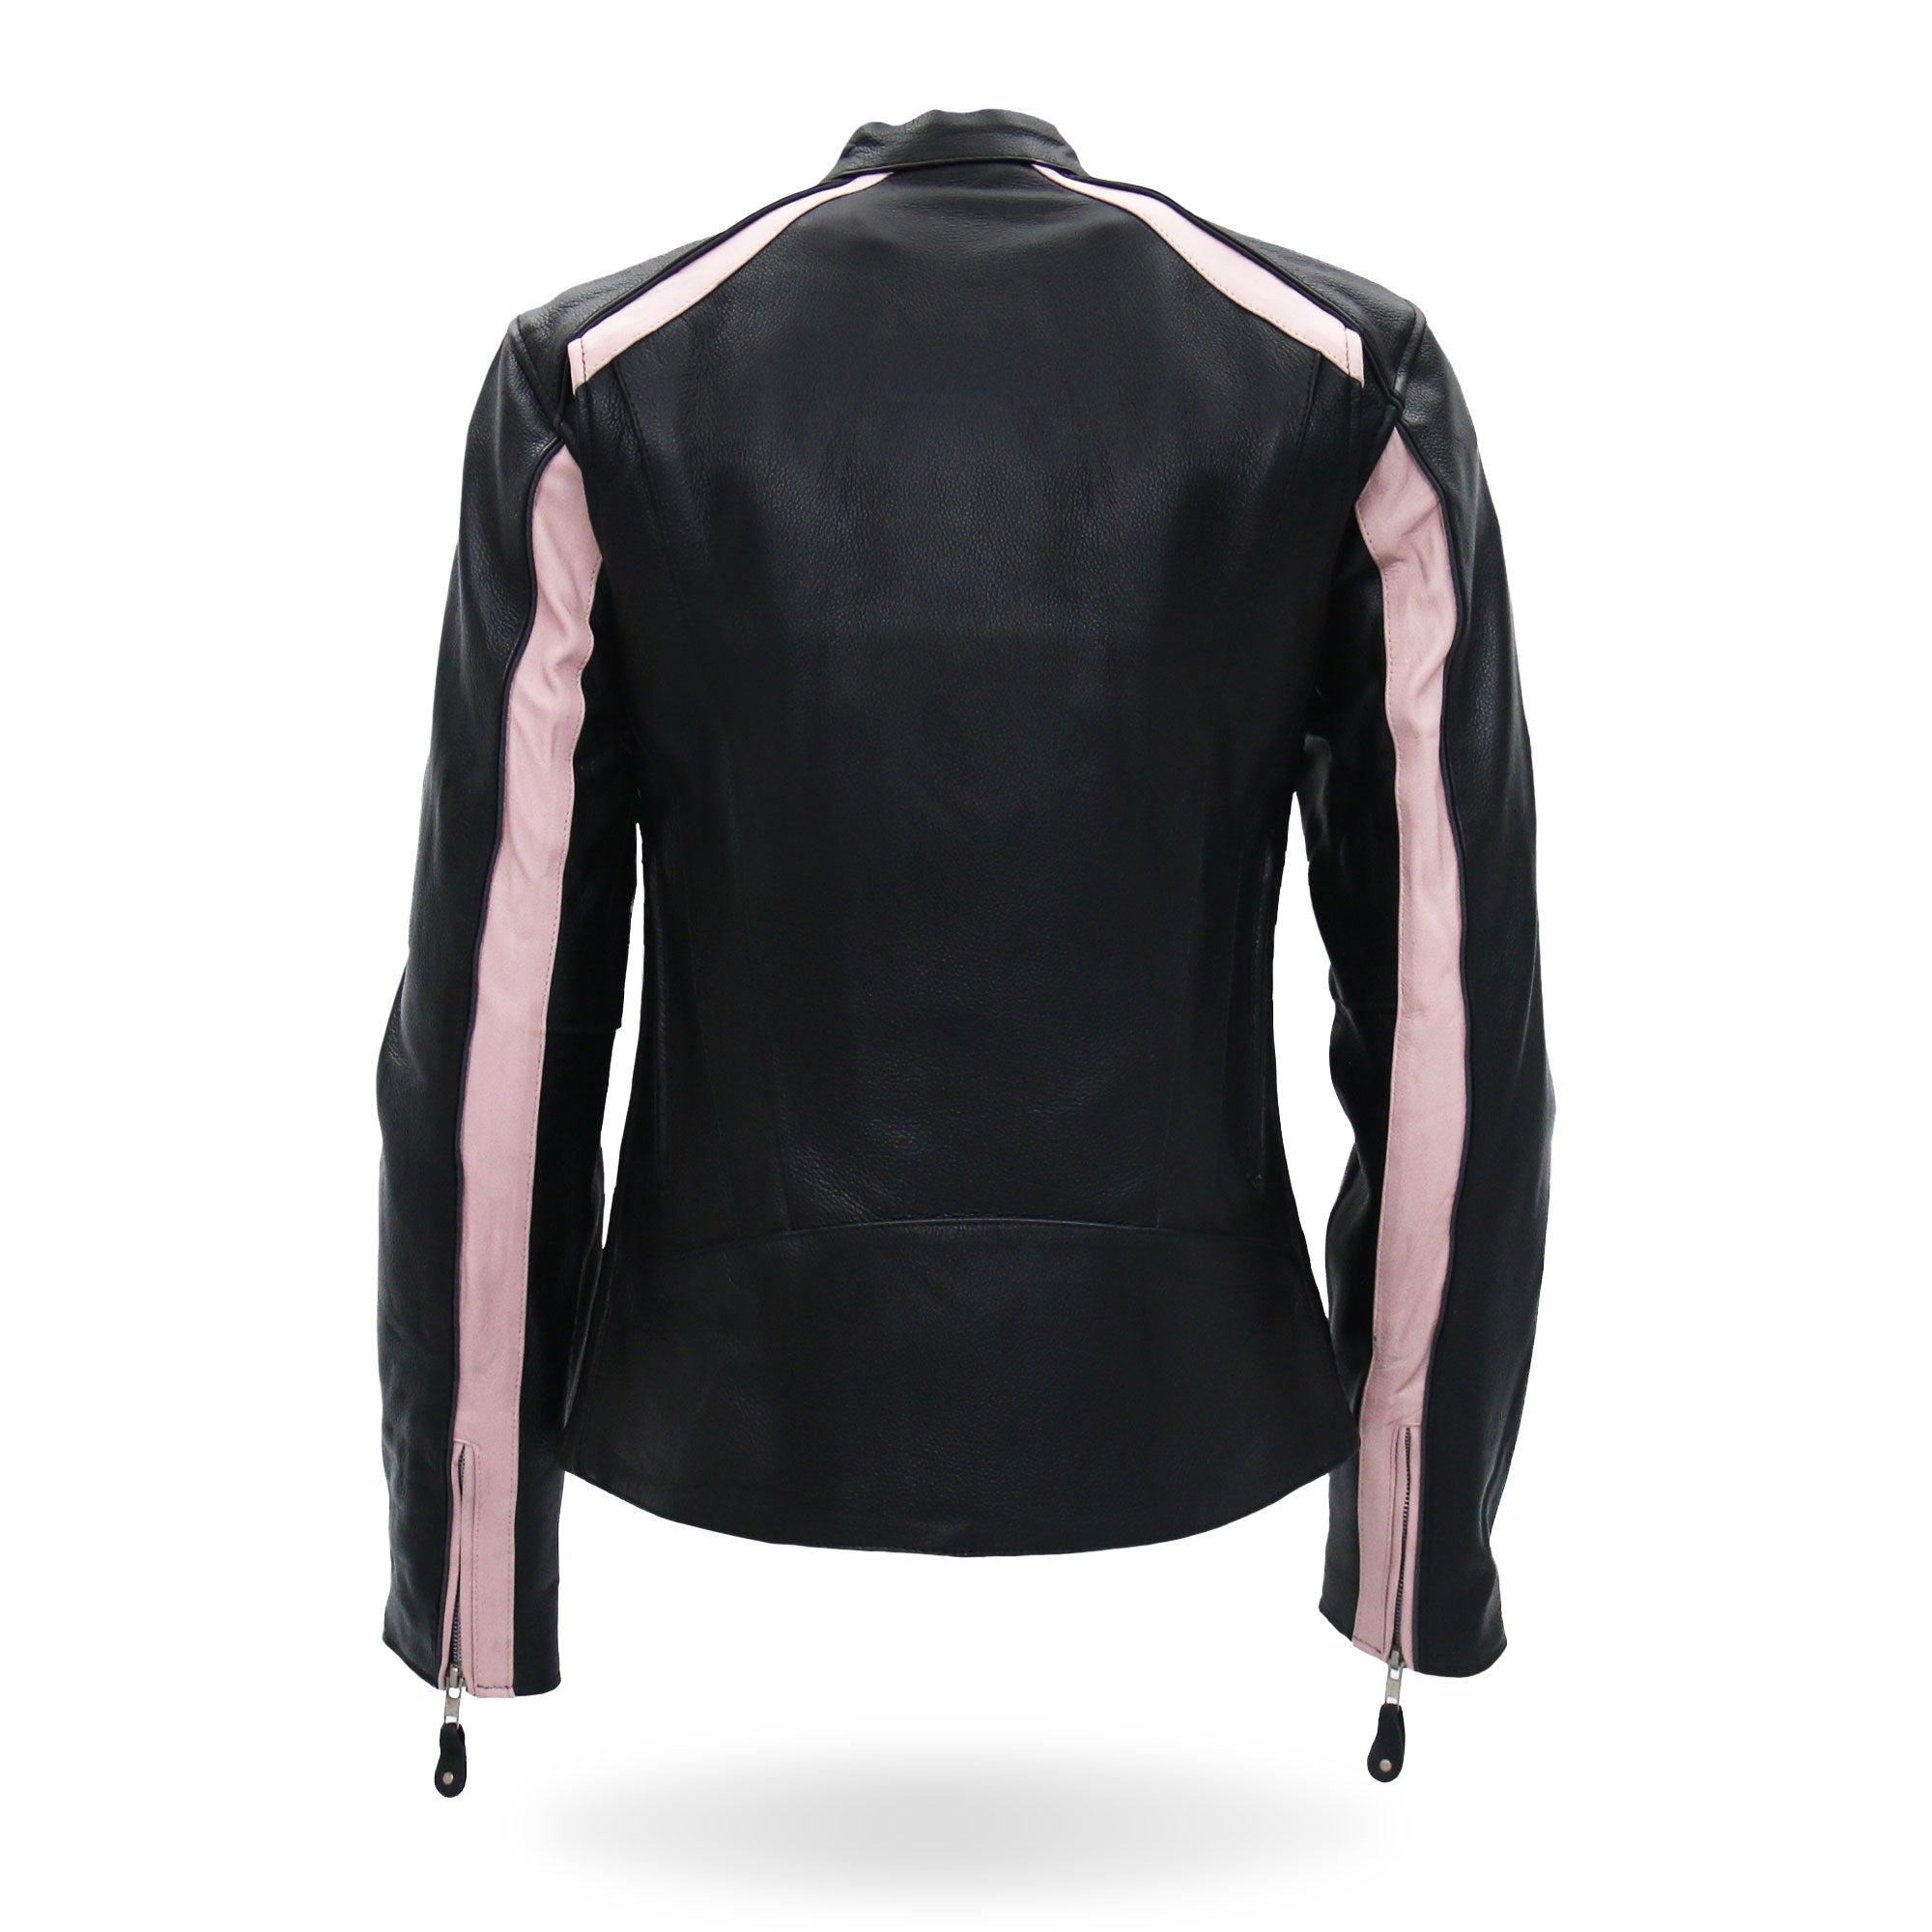 Hot Leathers JKL1022 Pink Striped Motorcycle Leather Biker Jacket with Reflective Piping